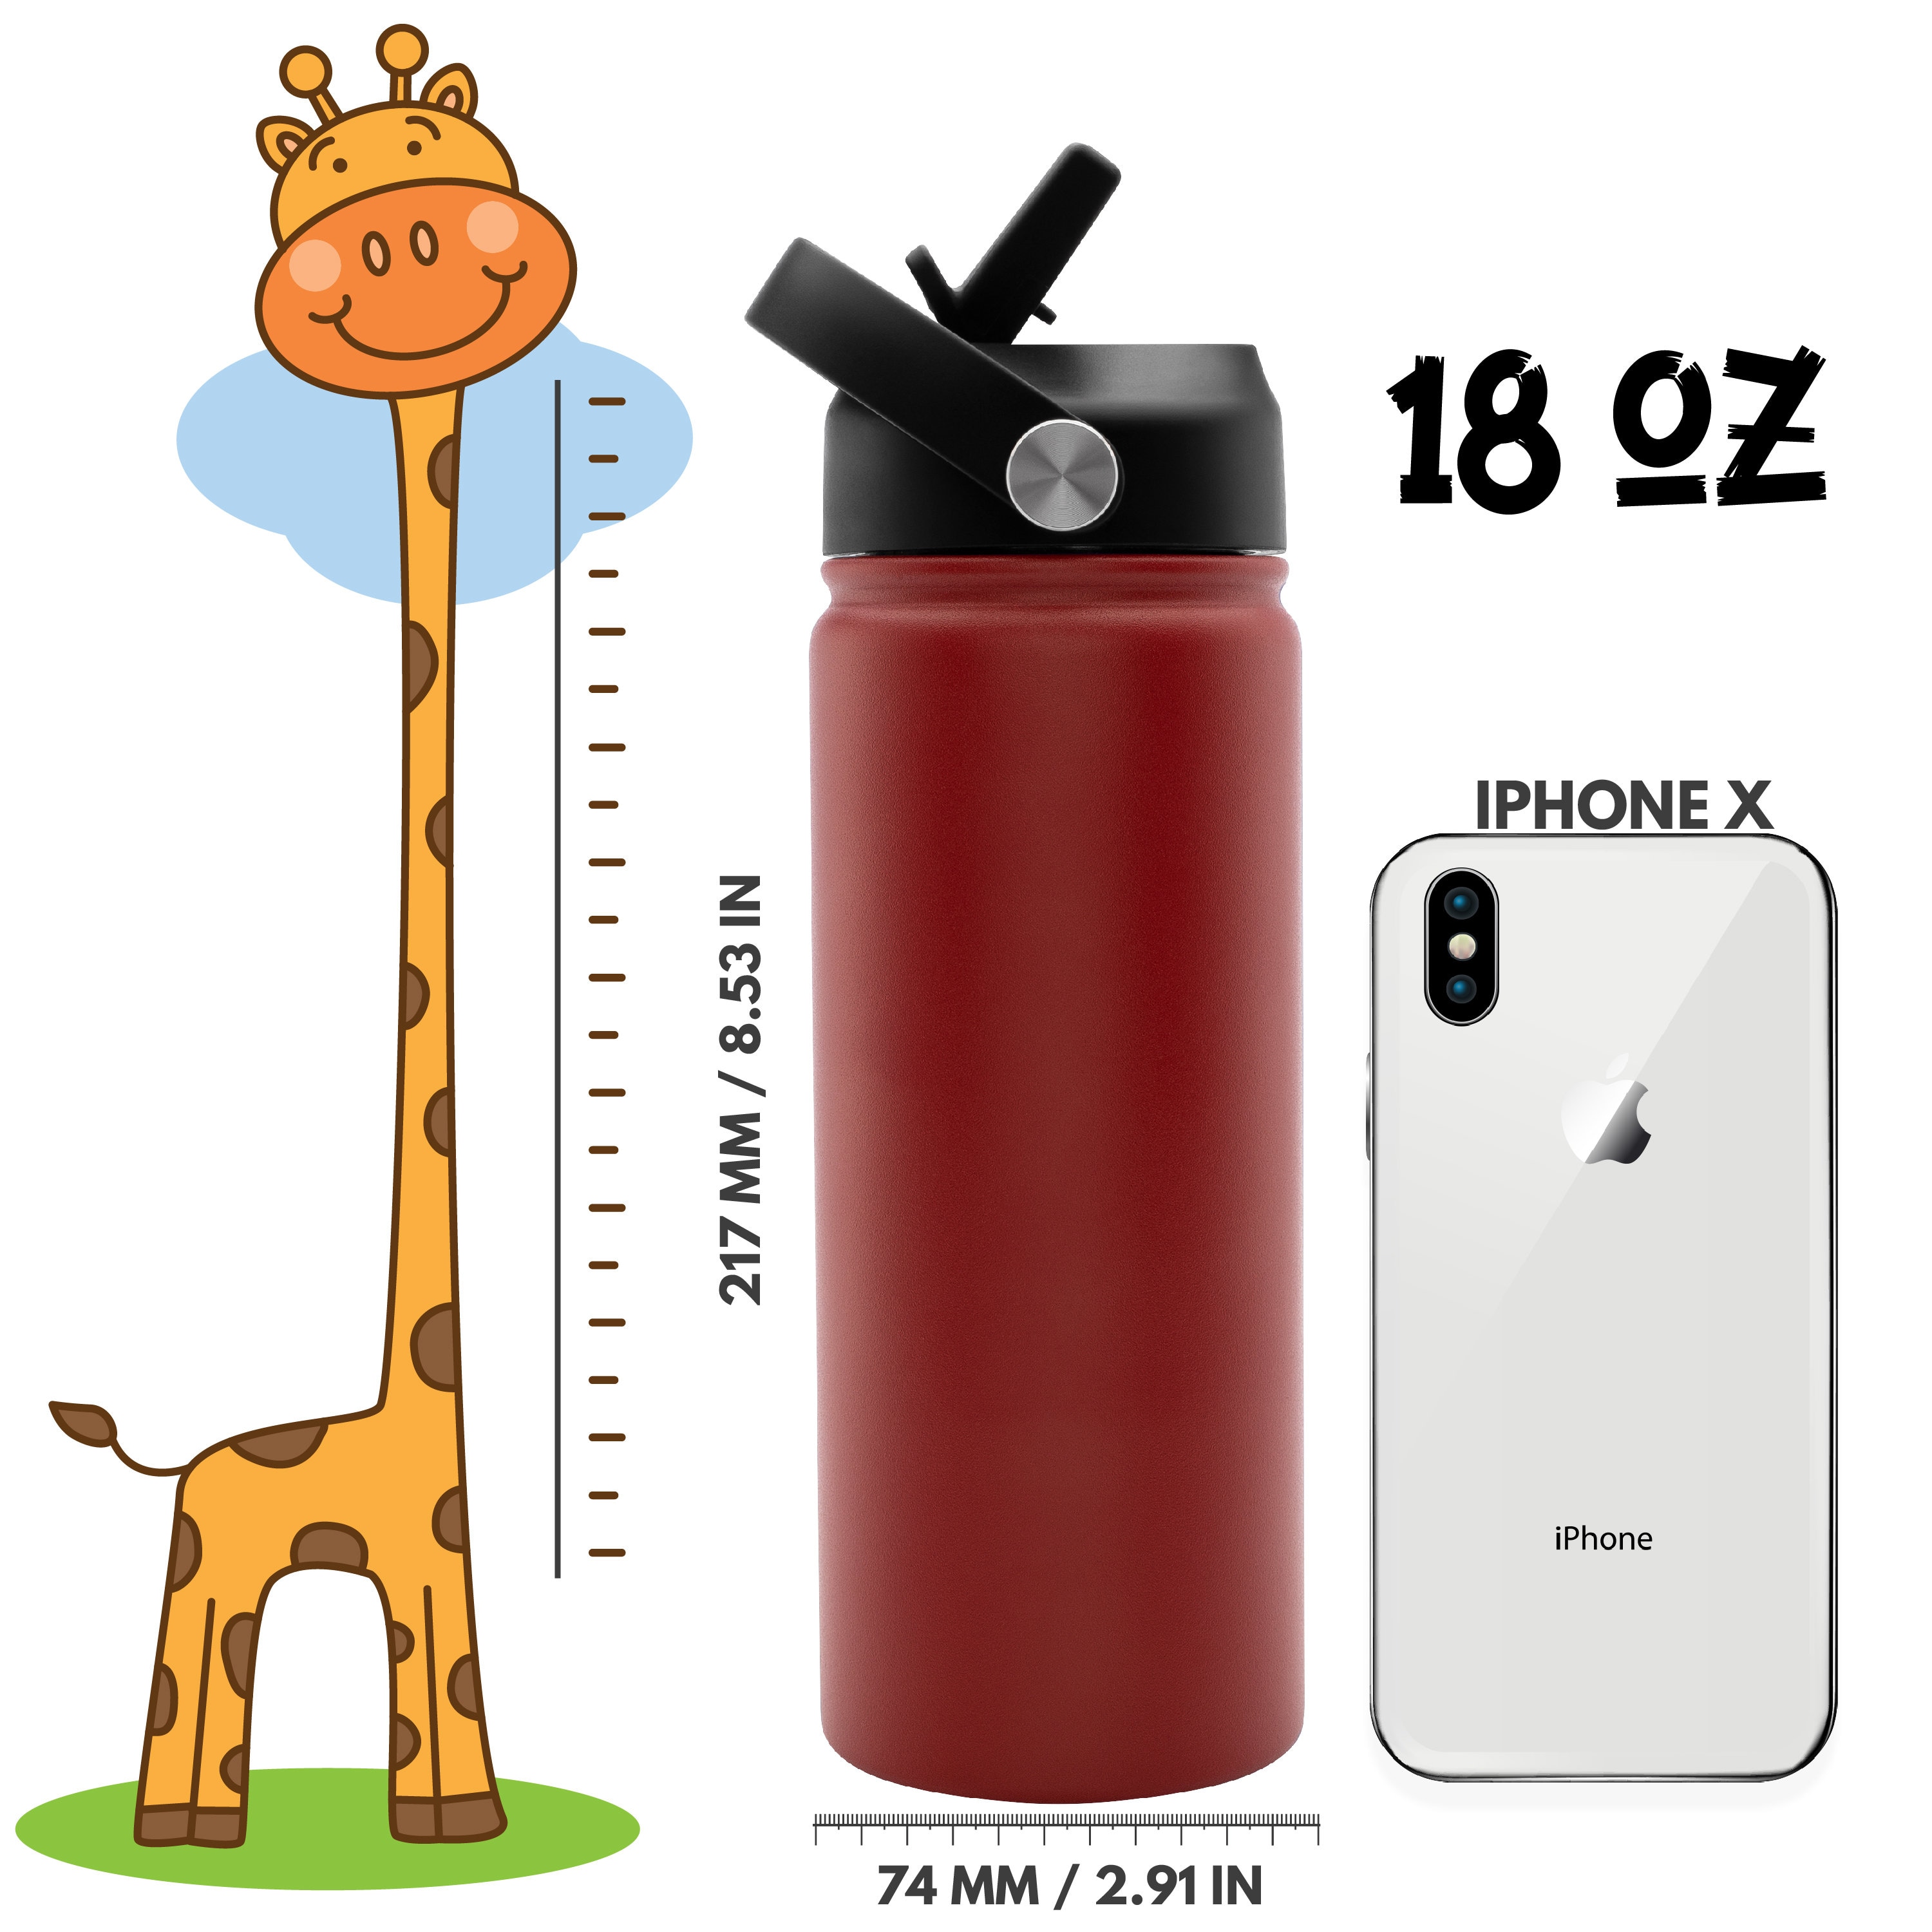 Personalized stainless steel waterbottle with straw, kids water